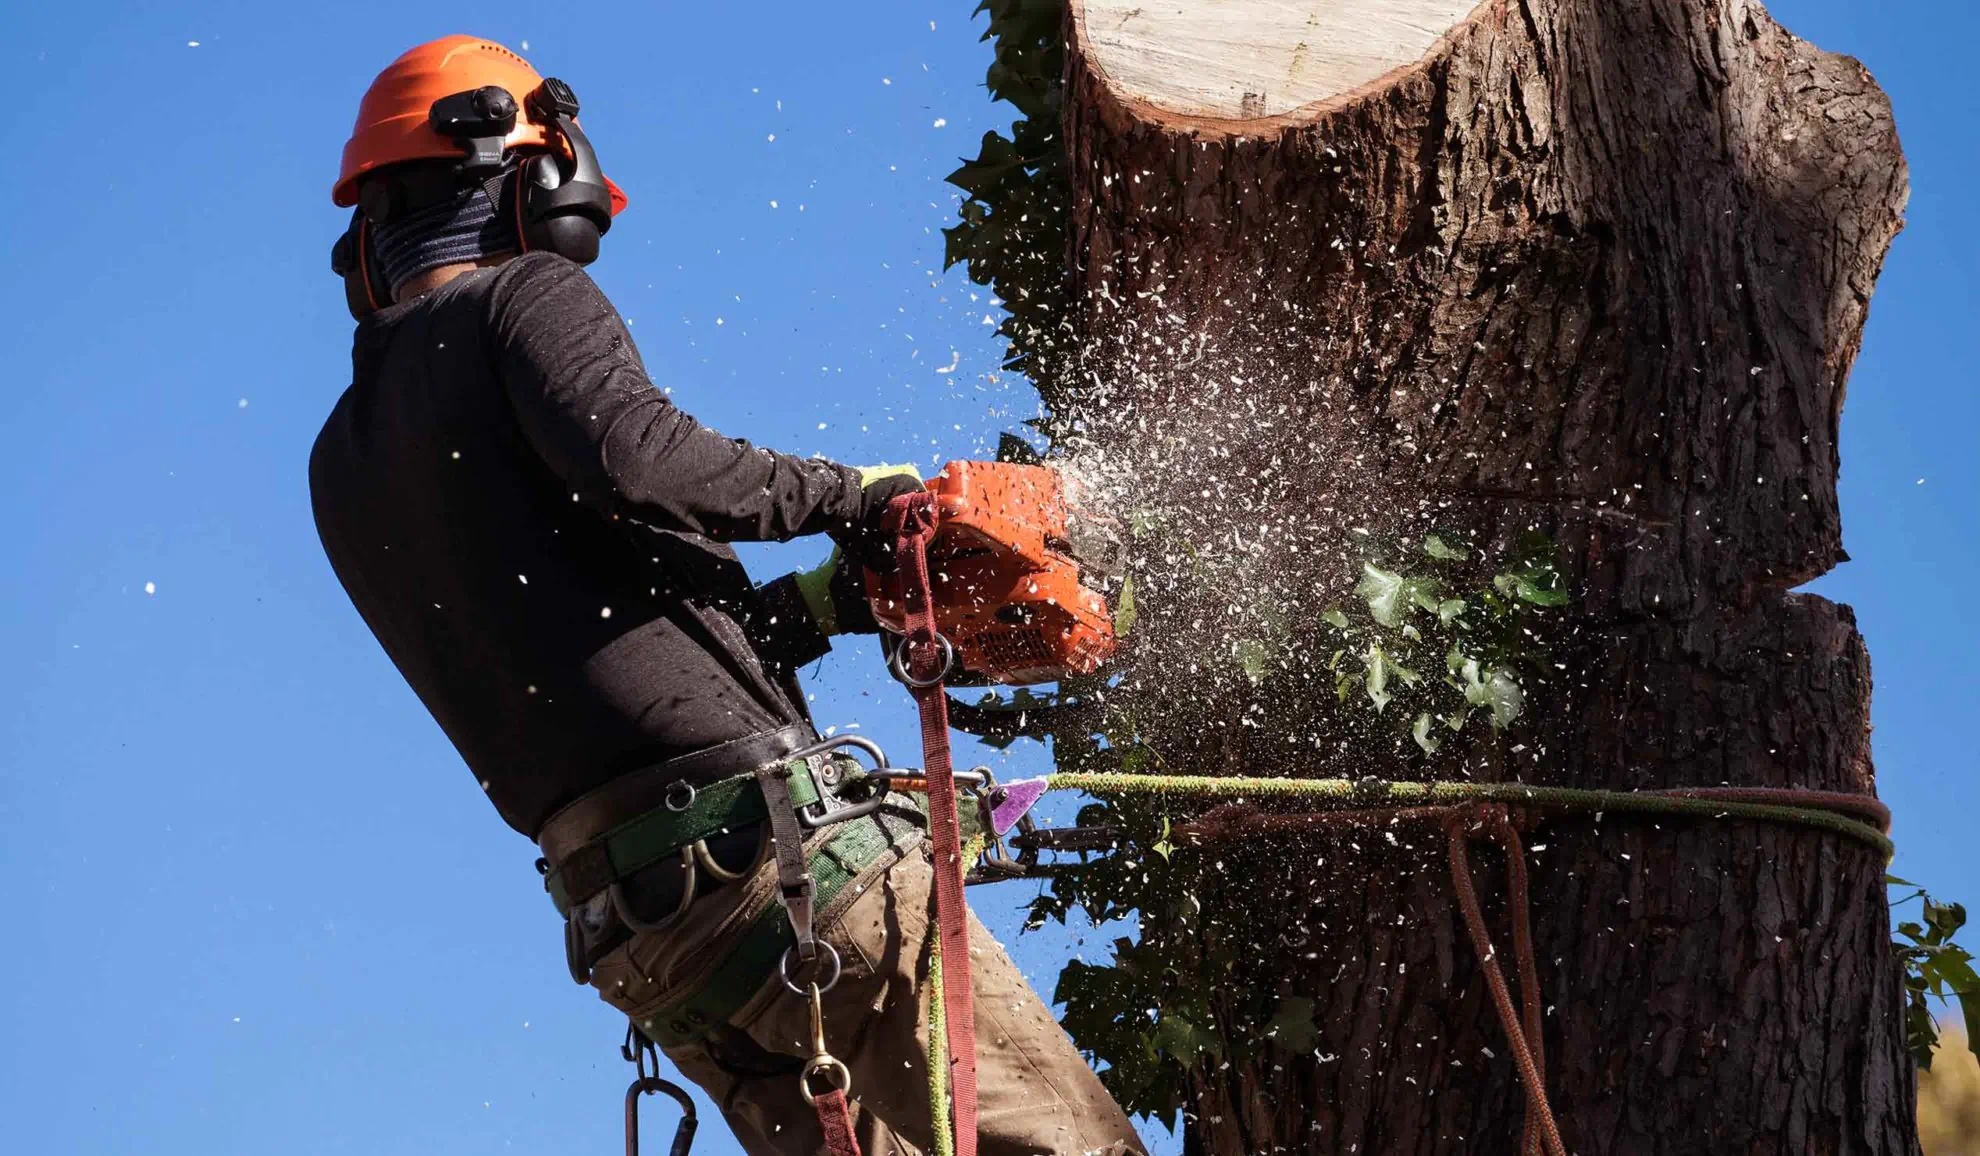 worker trimming a tree